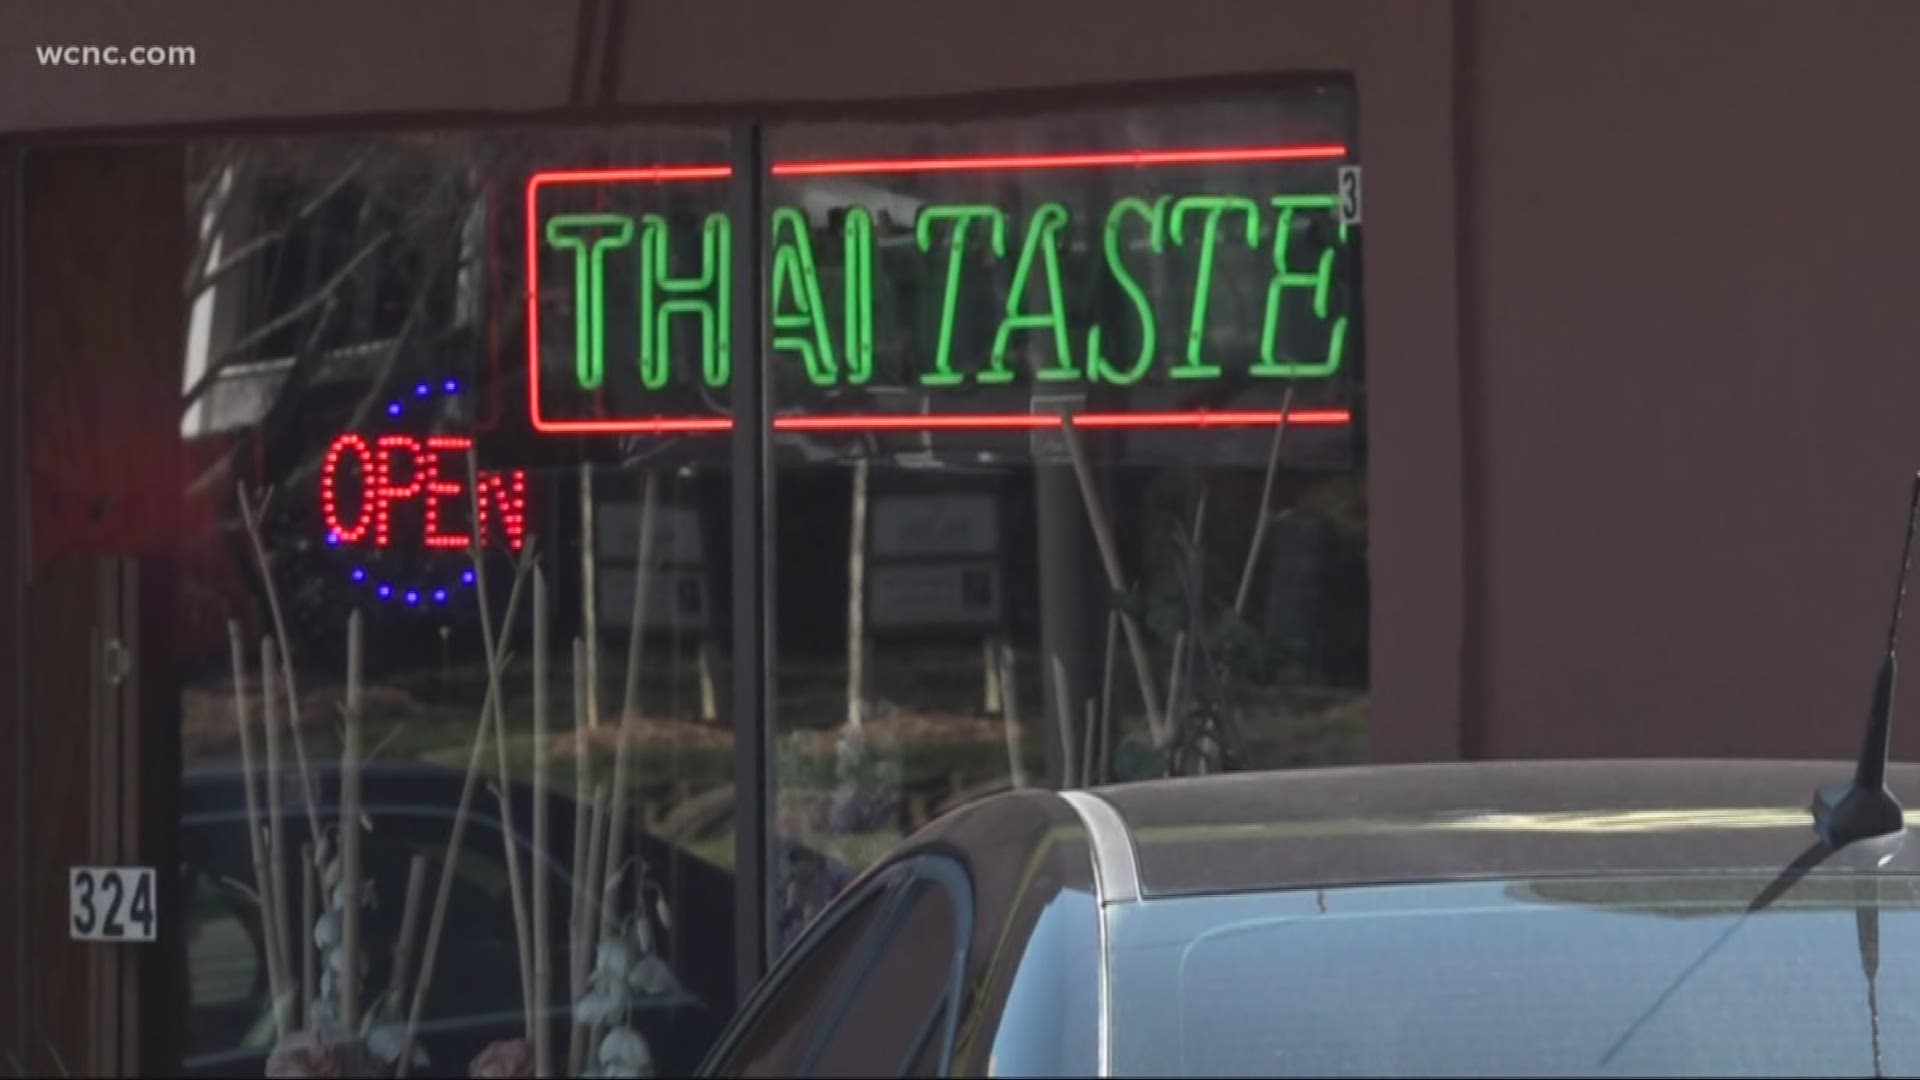 Thai Taste is considered one of the best in the area and has clientele that includes Carolina Panthers players.